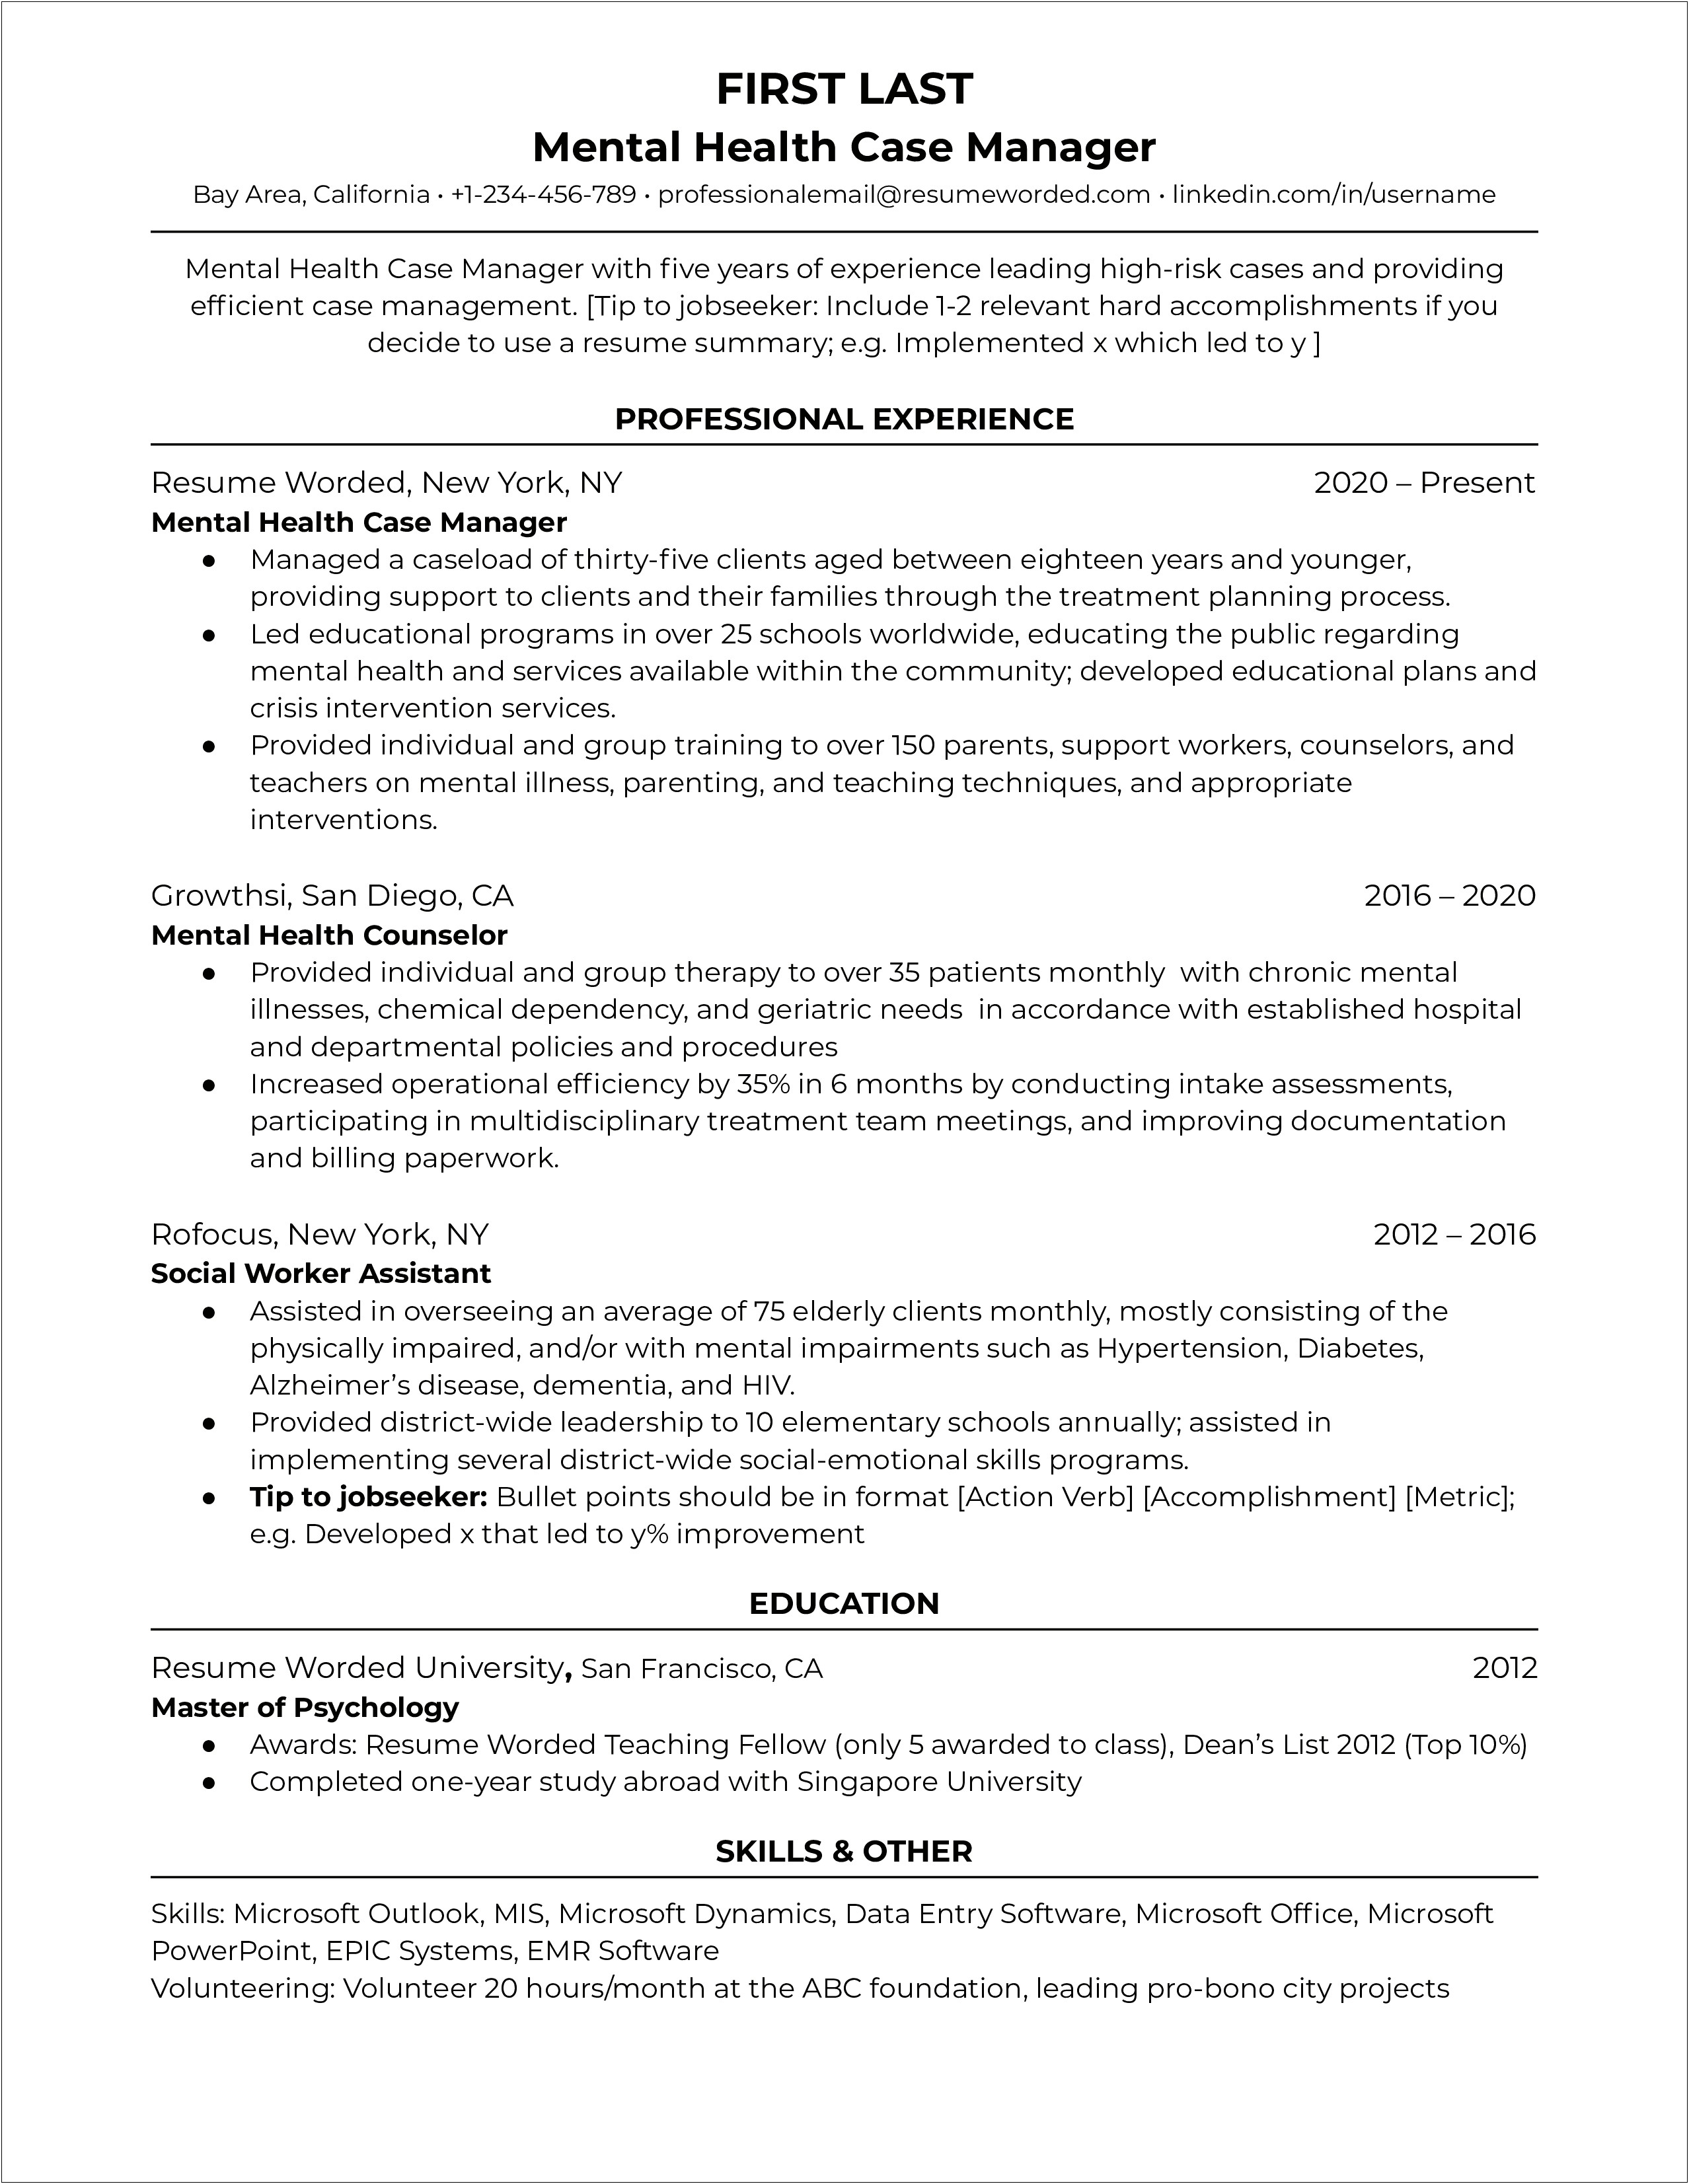 Appropriate Volunteer Experience For Resume To Administrator